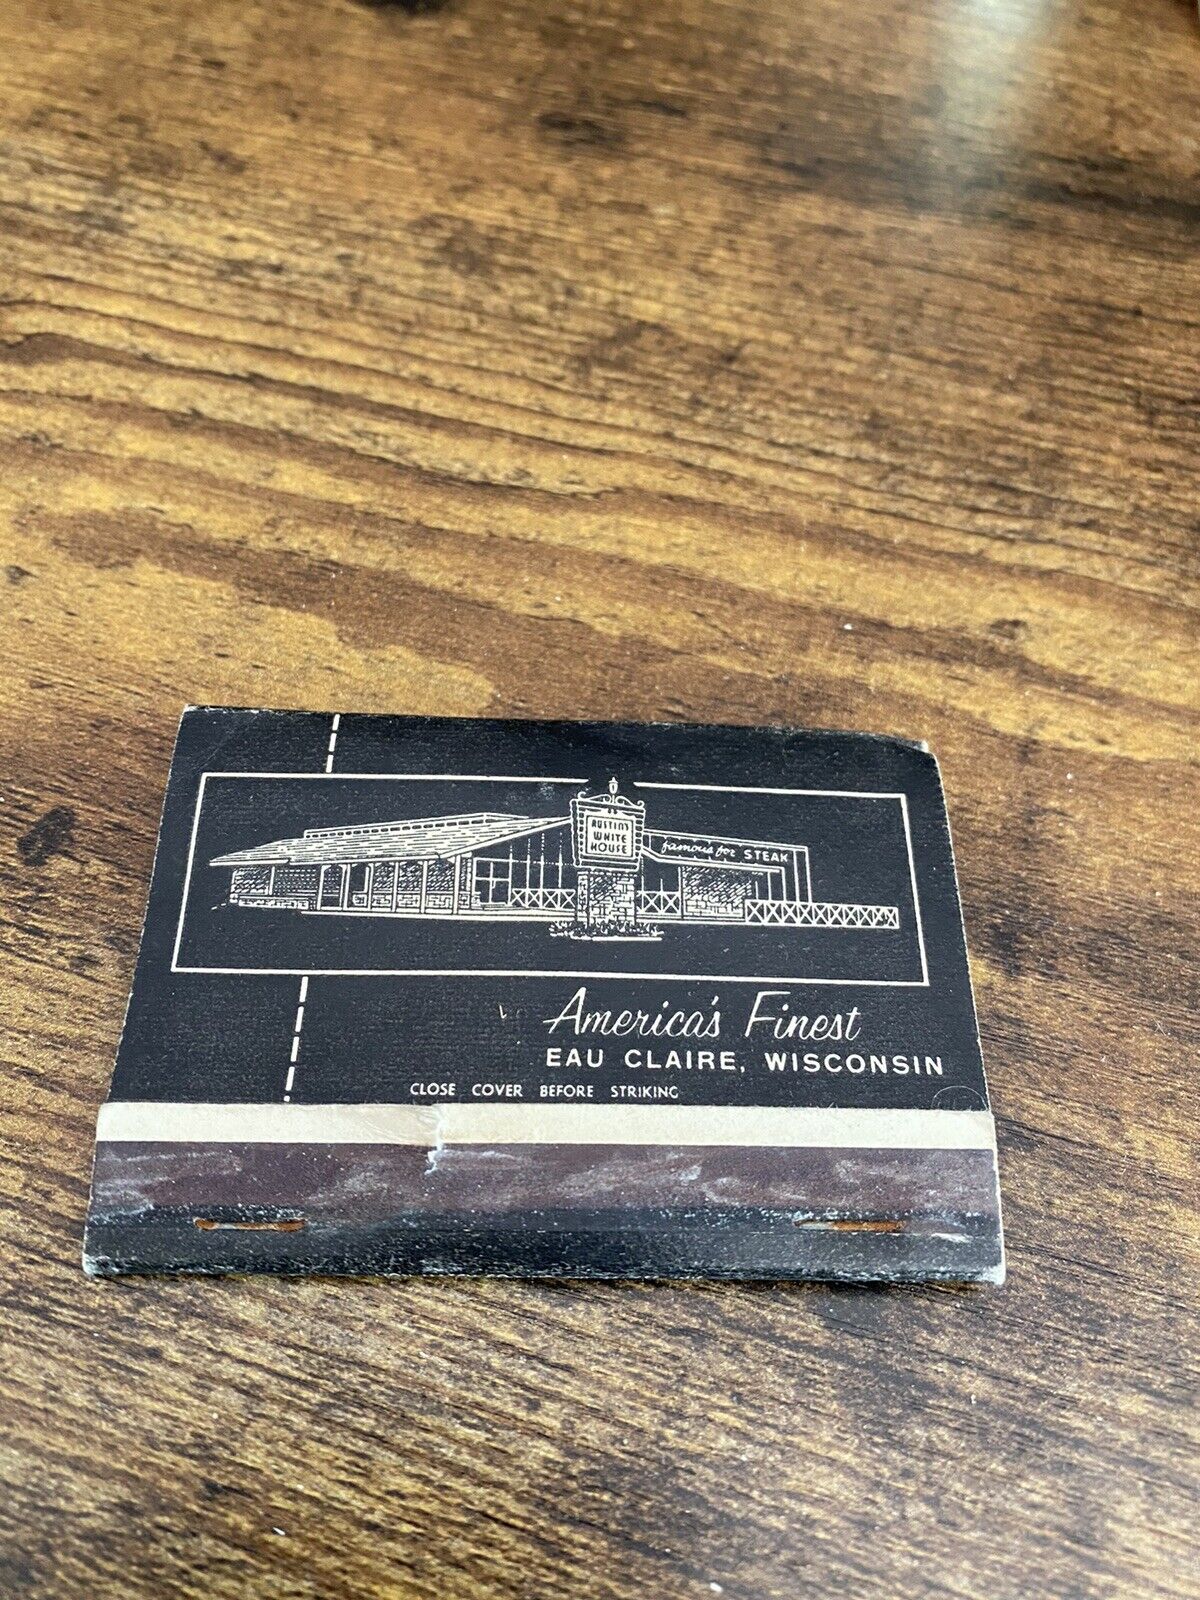 Vintage Austin’s White House Eau Claire Wisconsin Matchbook Matches Advertising